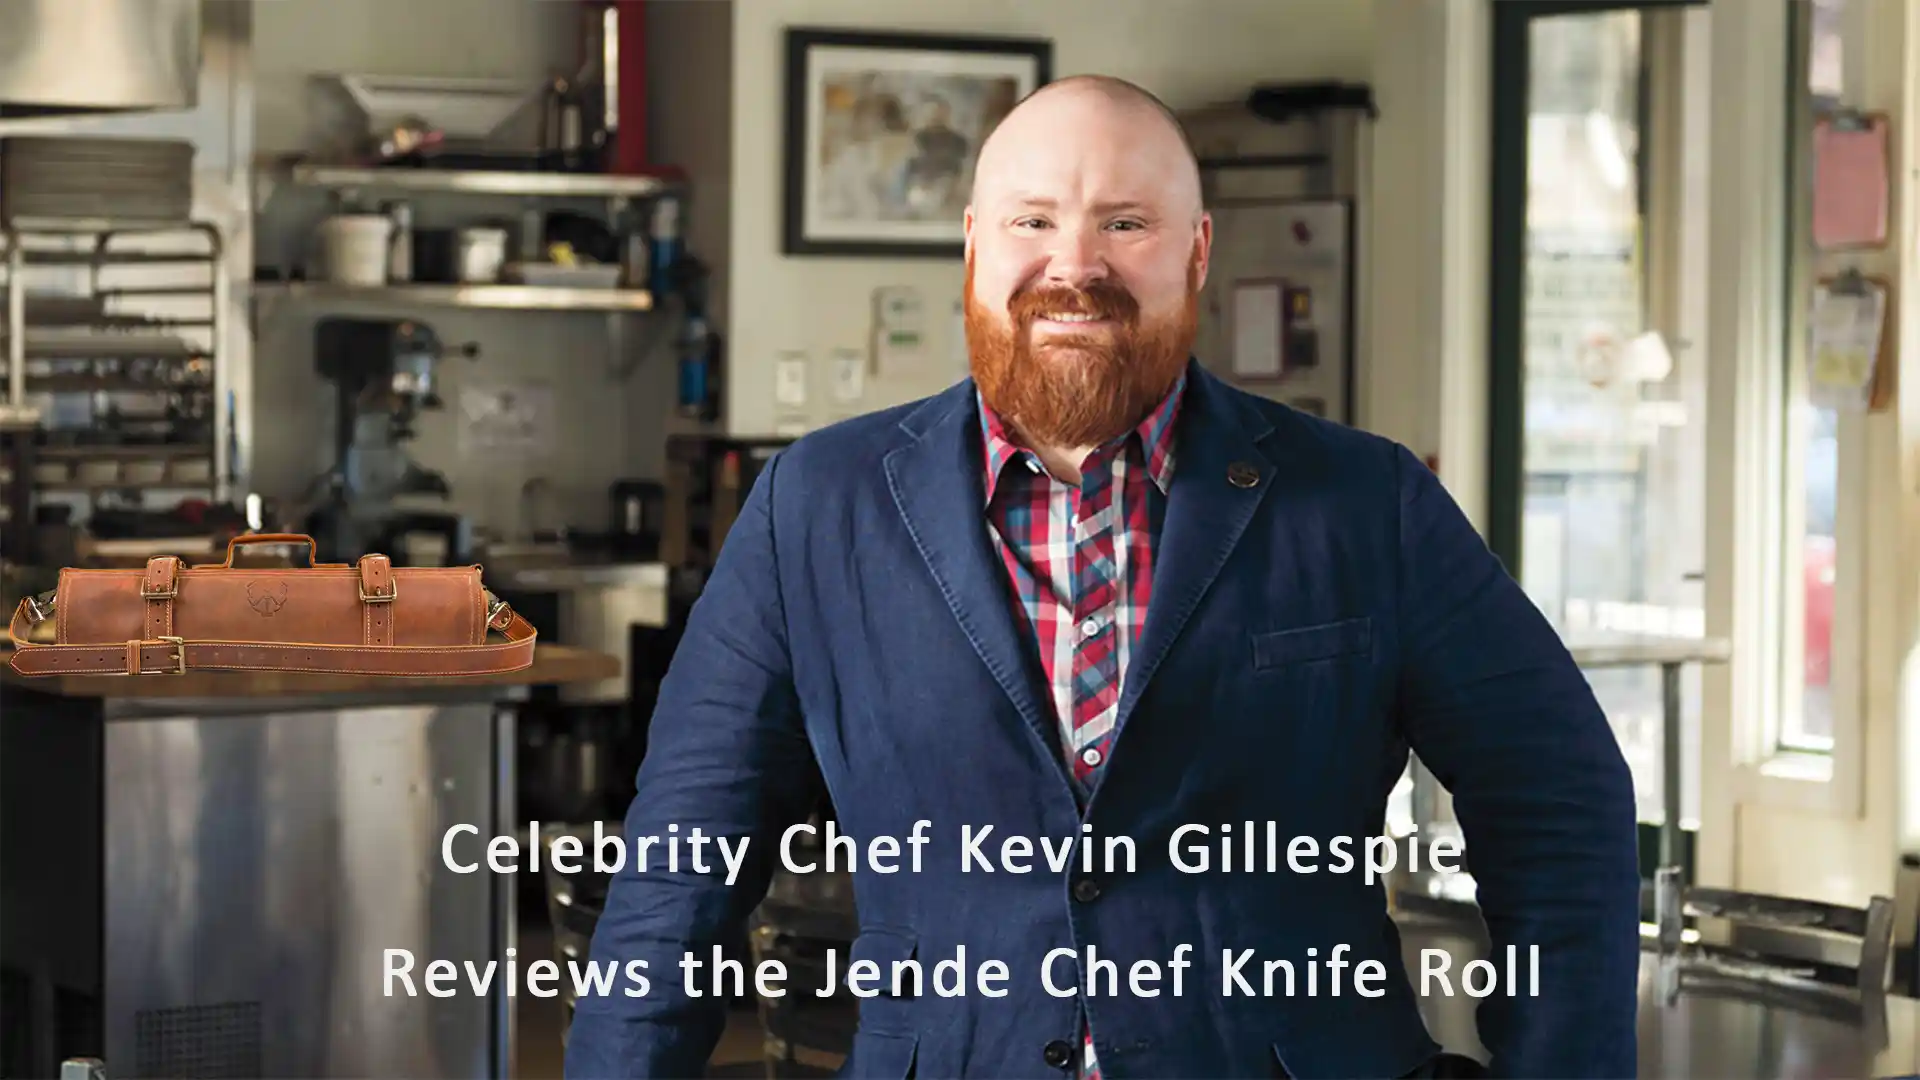 Celebrity Chef Kevin Gillespie Reviews the Jende Chef Knife Roll